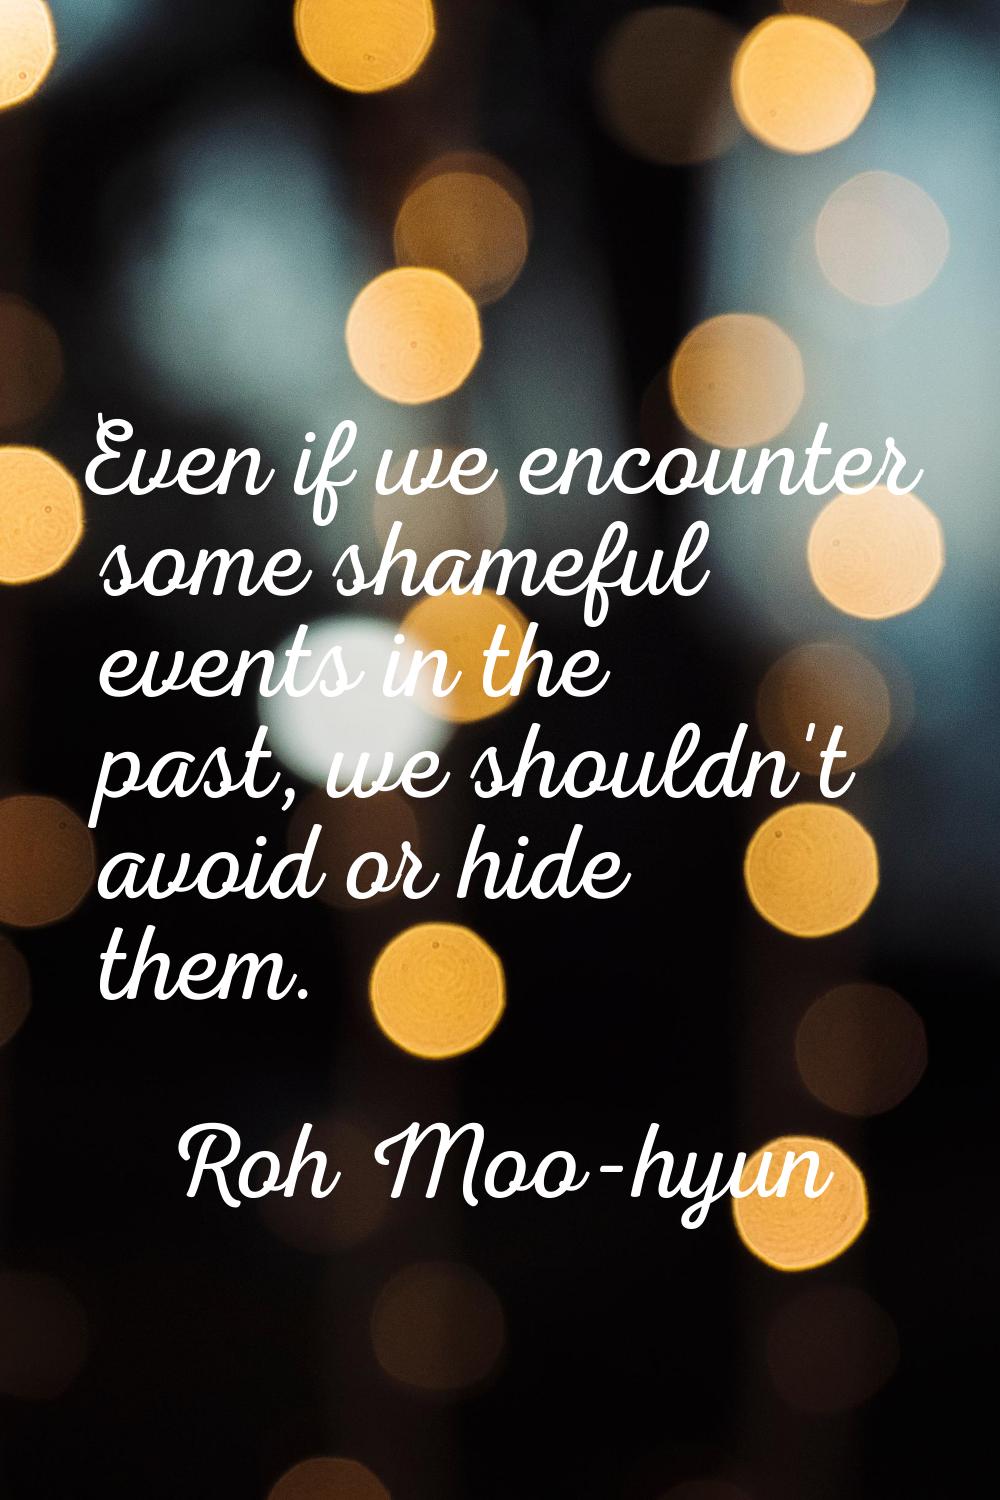 Even if we encounter some shameful events in the past, we shouldn't avoid or hide them.